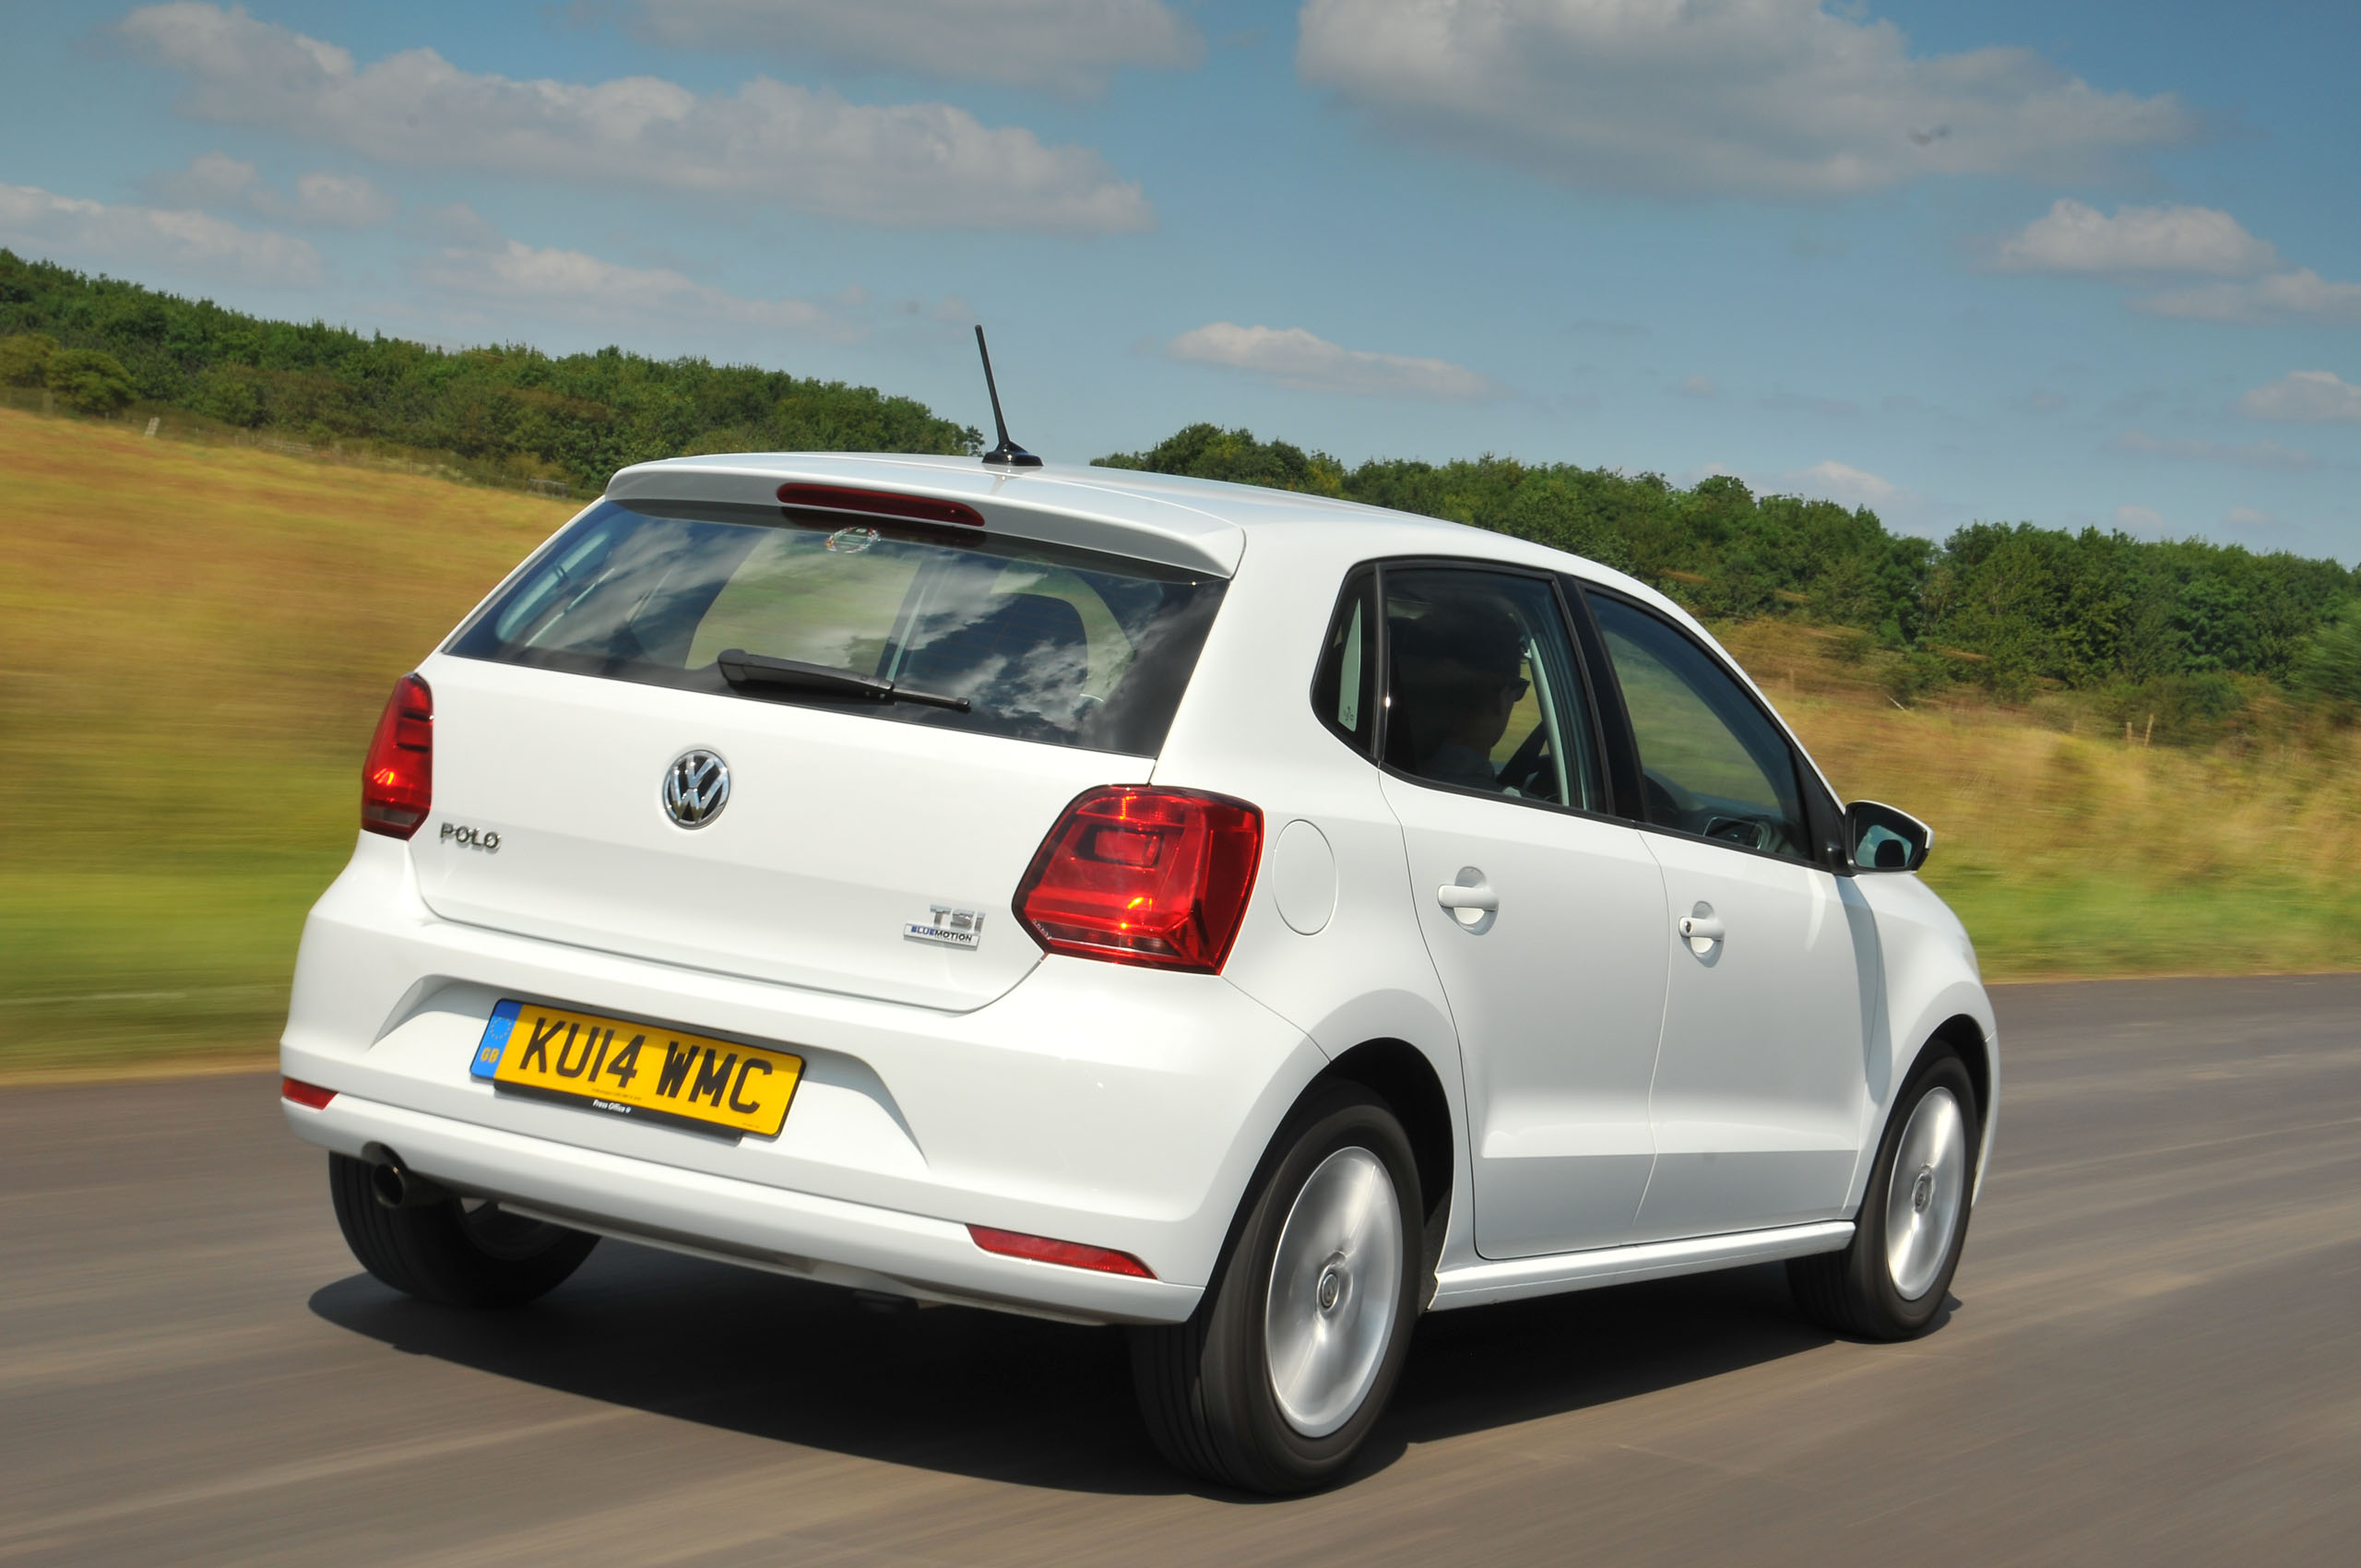 New Volkswagen Polo GTI (2014-2017) Review, Drive, Specs & Pricing